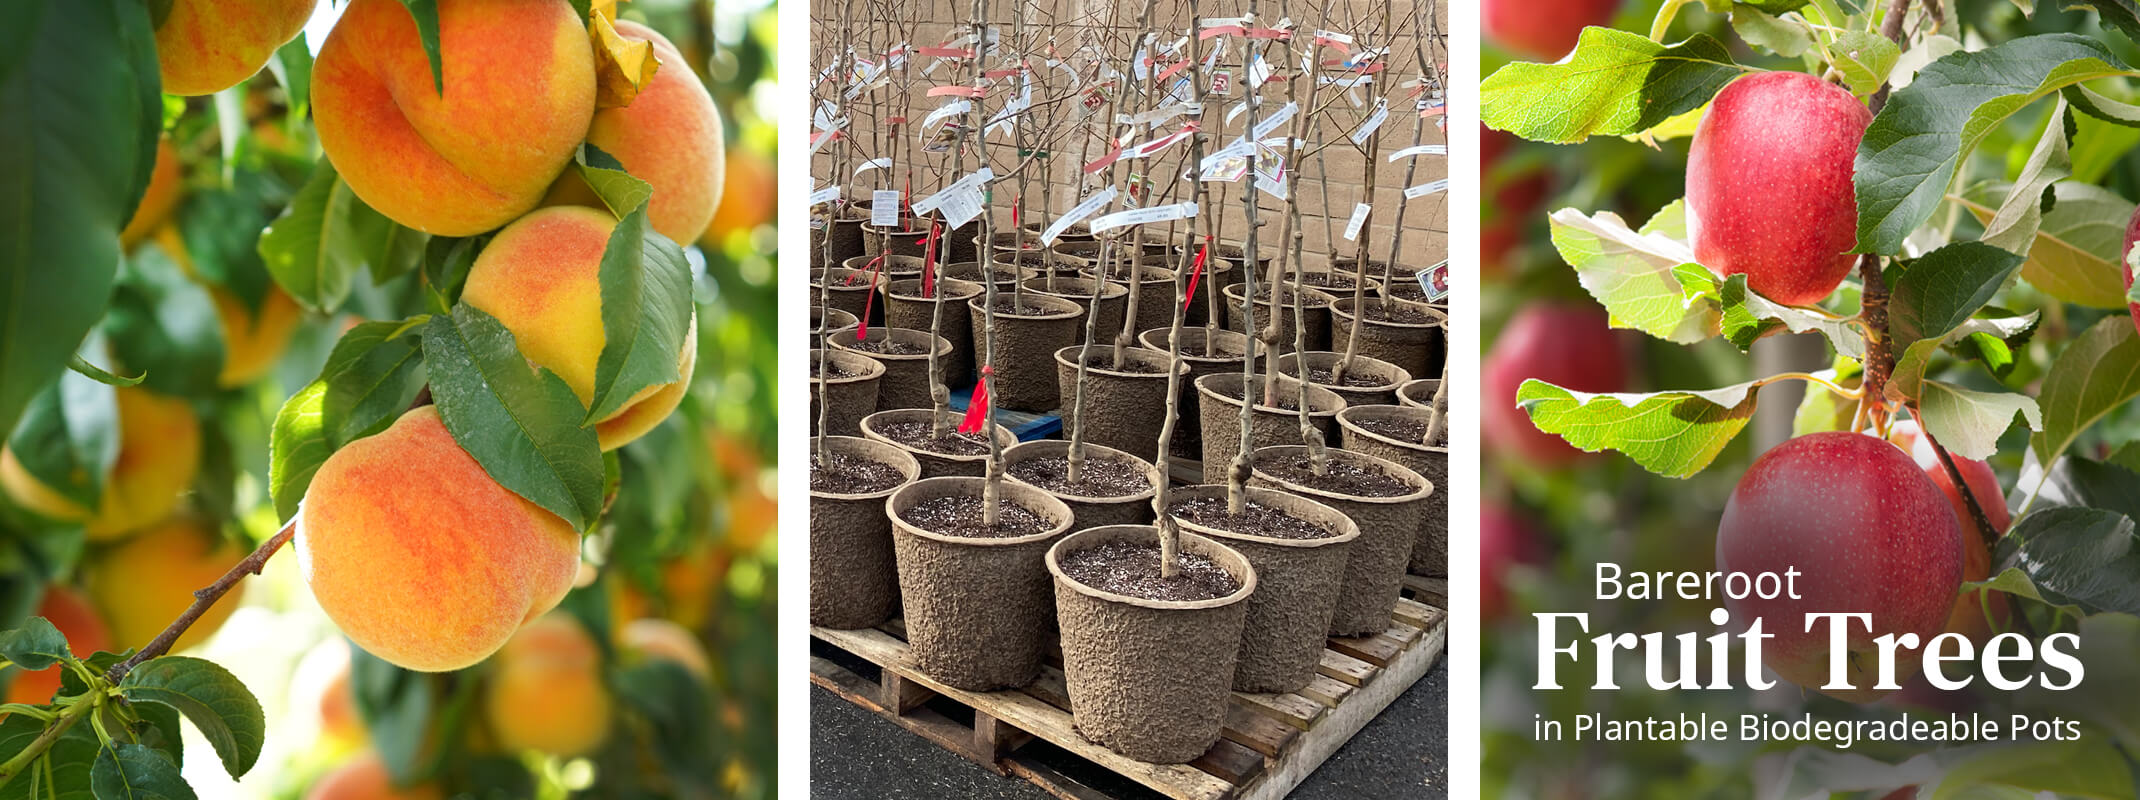 ripe peaches hanging on a peach tree, bareroot fruit trees potted up and fuji apples haning from a fruit tree with the words bareroot fruit tree in plantable biodegradeable pots